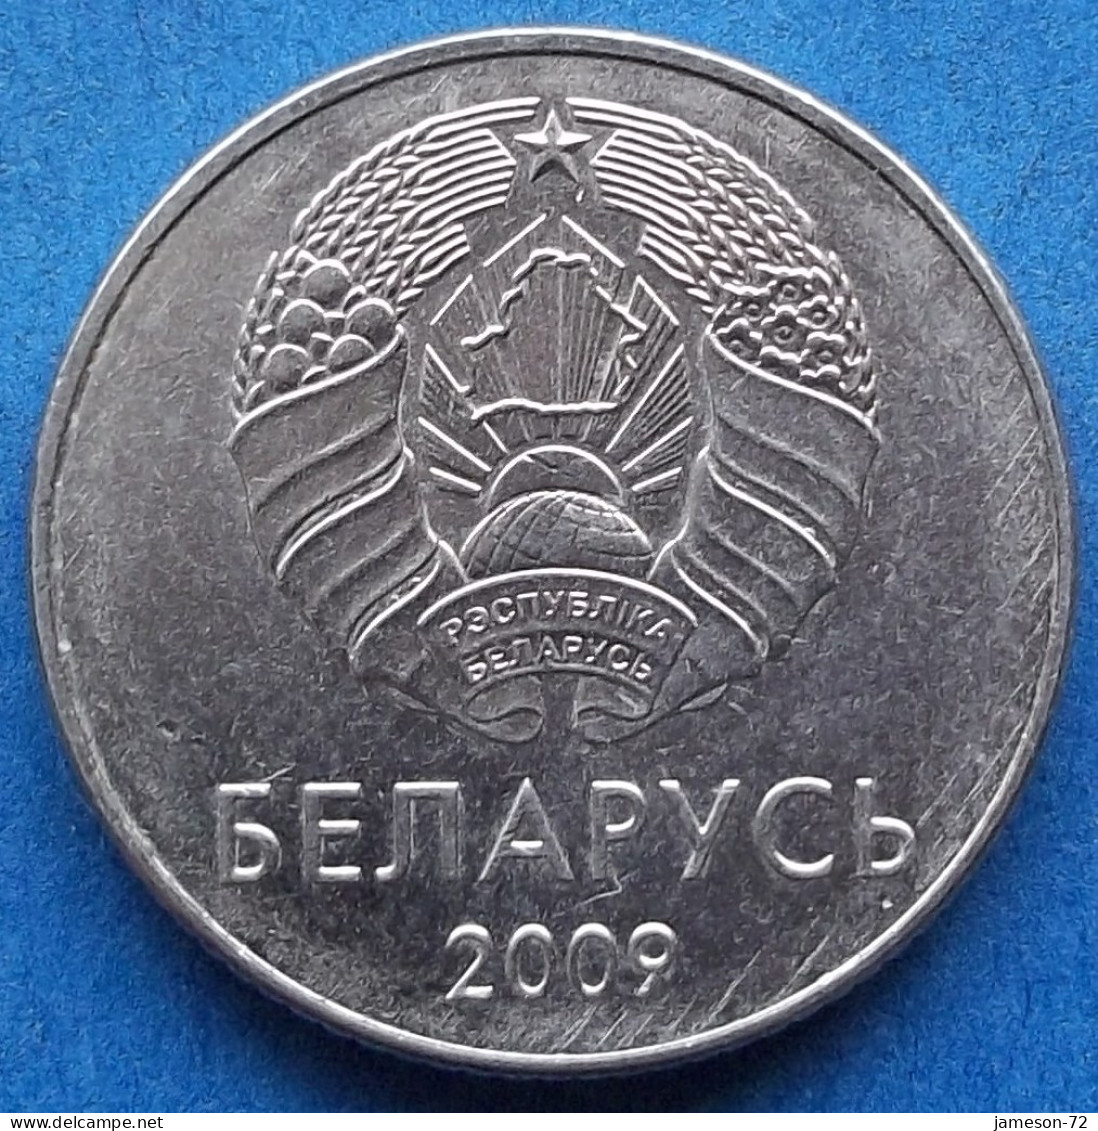 BELARUS - 1 Rouble 2009 KM# 567 Independent Republic (1991) - Edelweiss Coins - Bielorussia